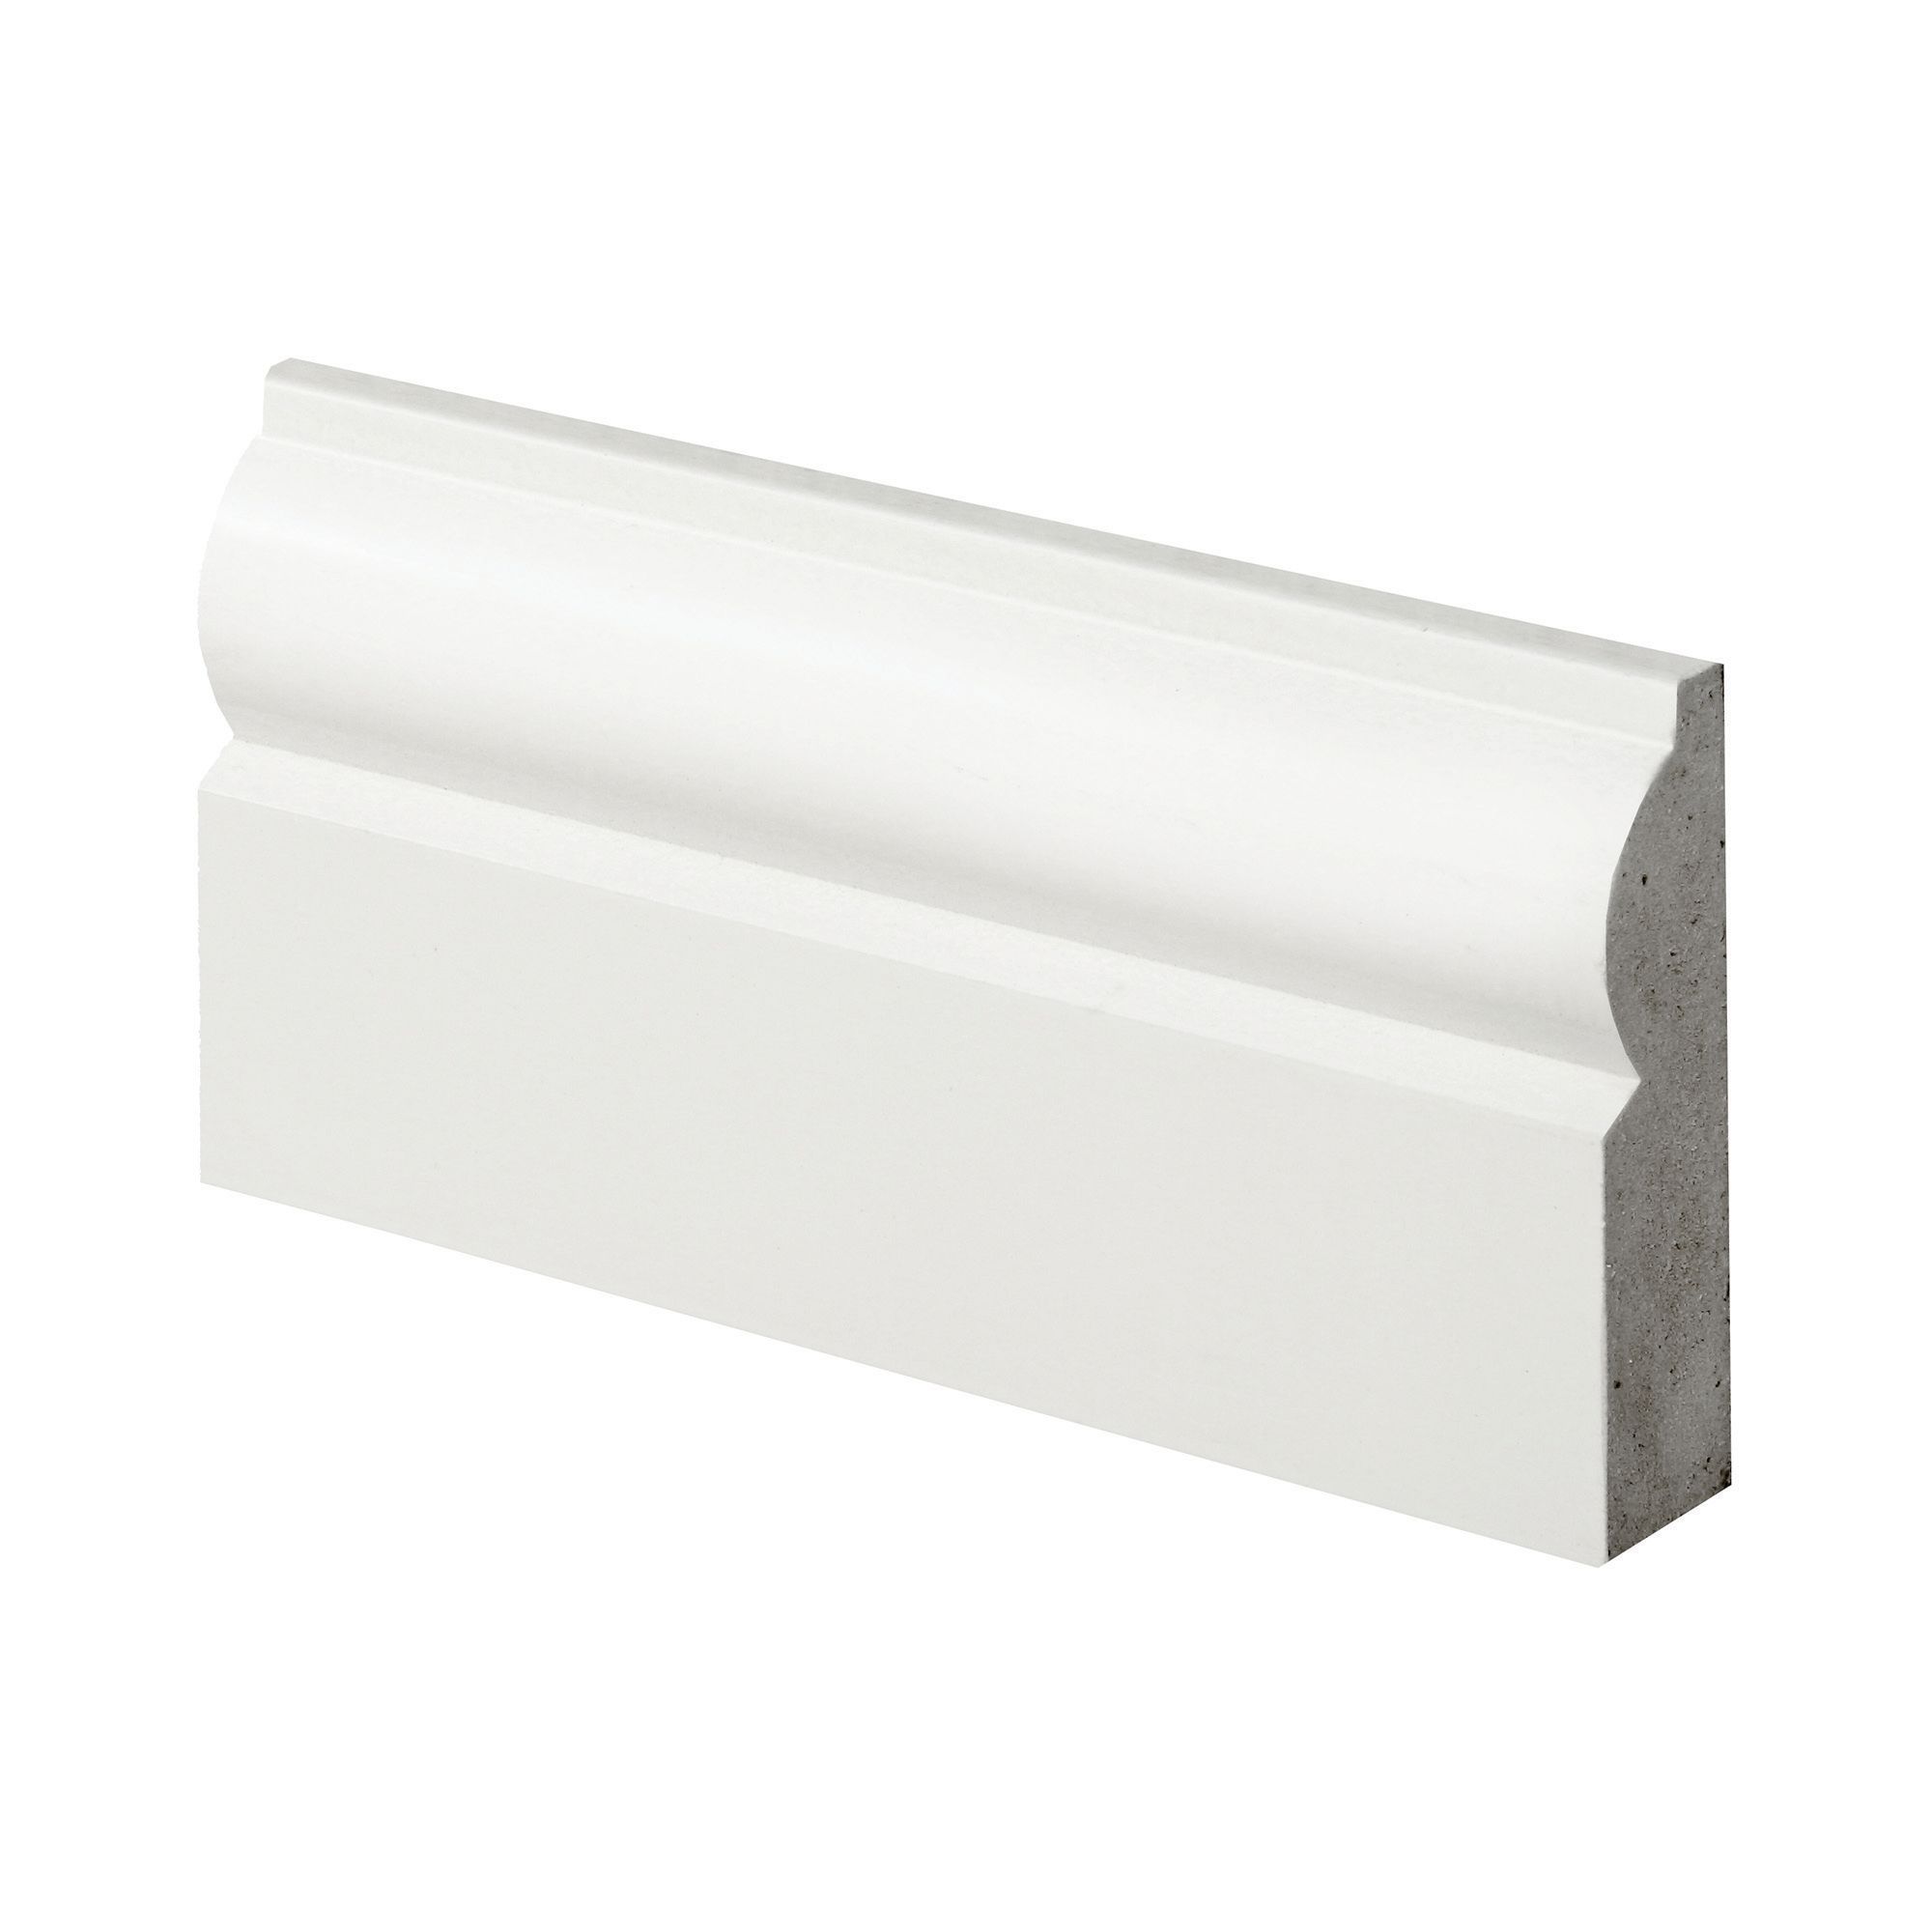 Image of Wickes Torus Fully Finished Architrave - 18mm x 69mm x 2.1m